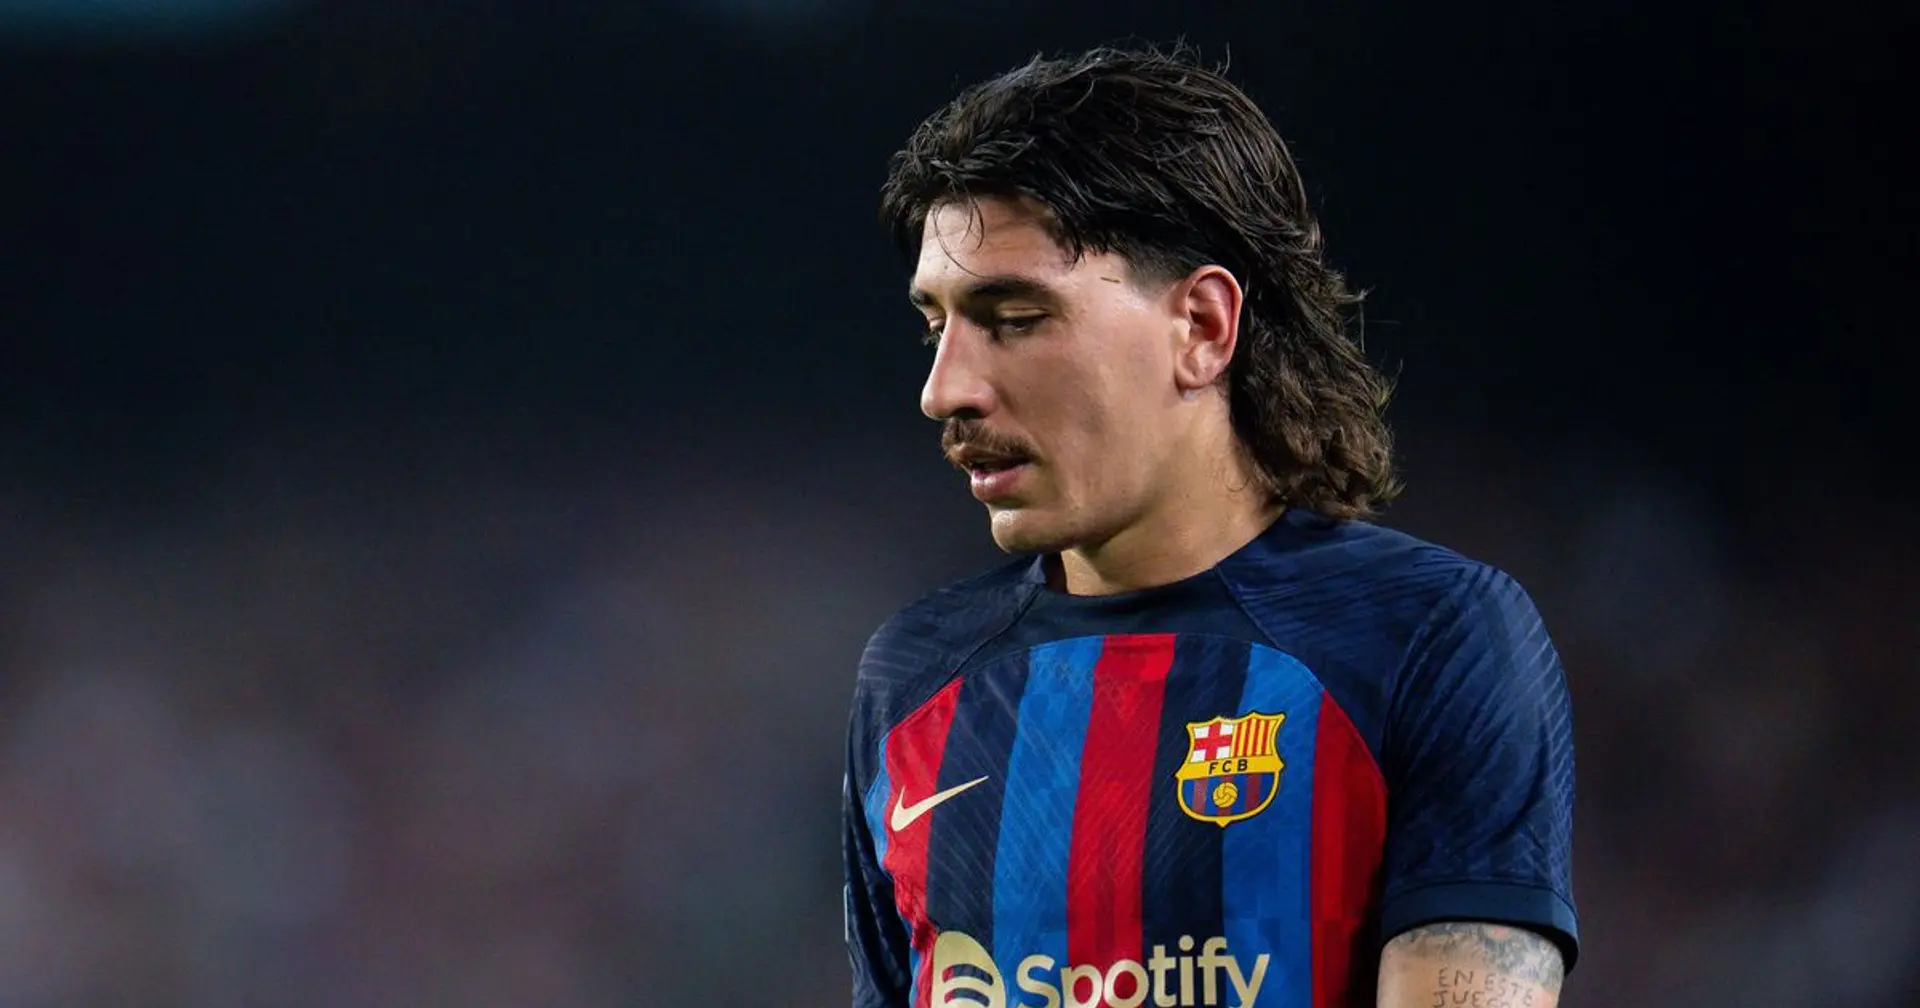 Barca will listen to offers on Bellerin in January (reliability: 5 stars)